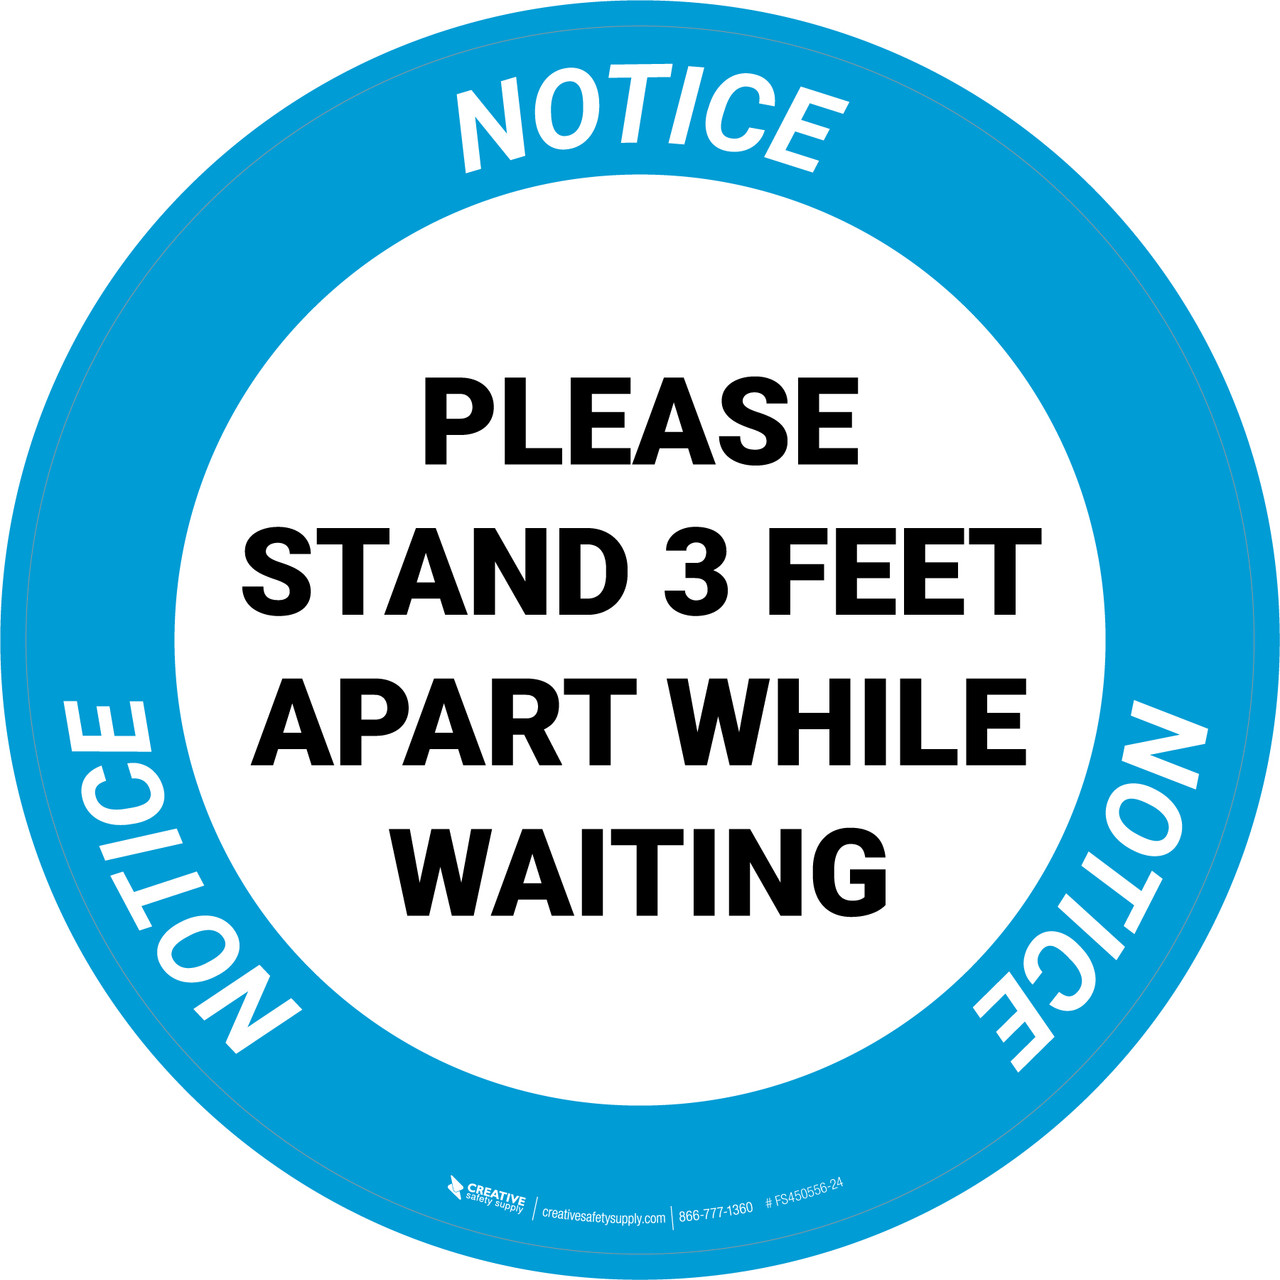 Notice: Please Stand Feet Apart While Waiting Circular Floor Sign